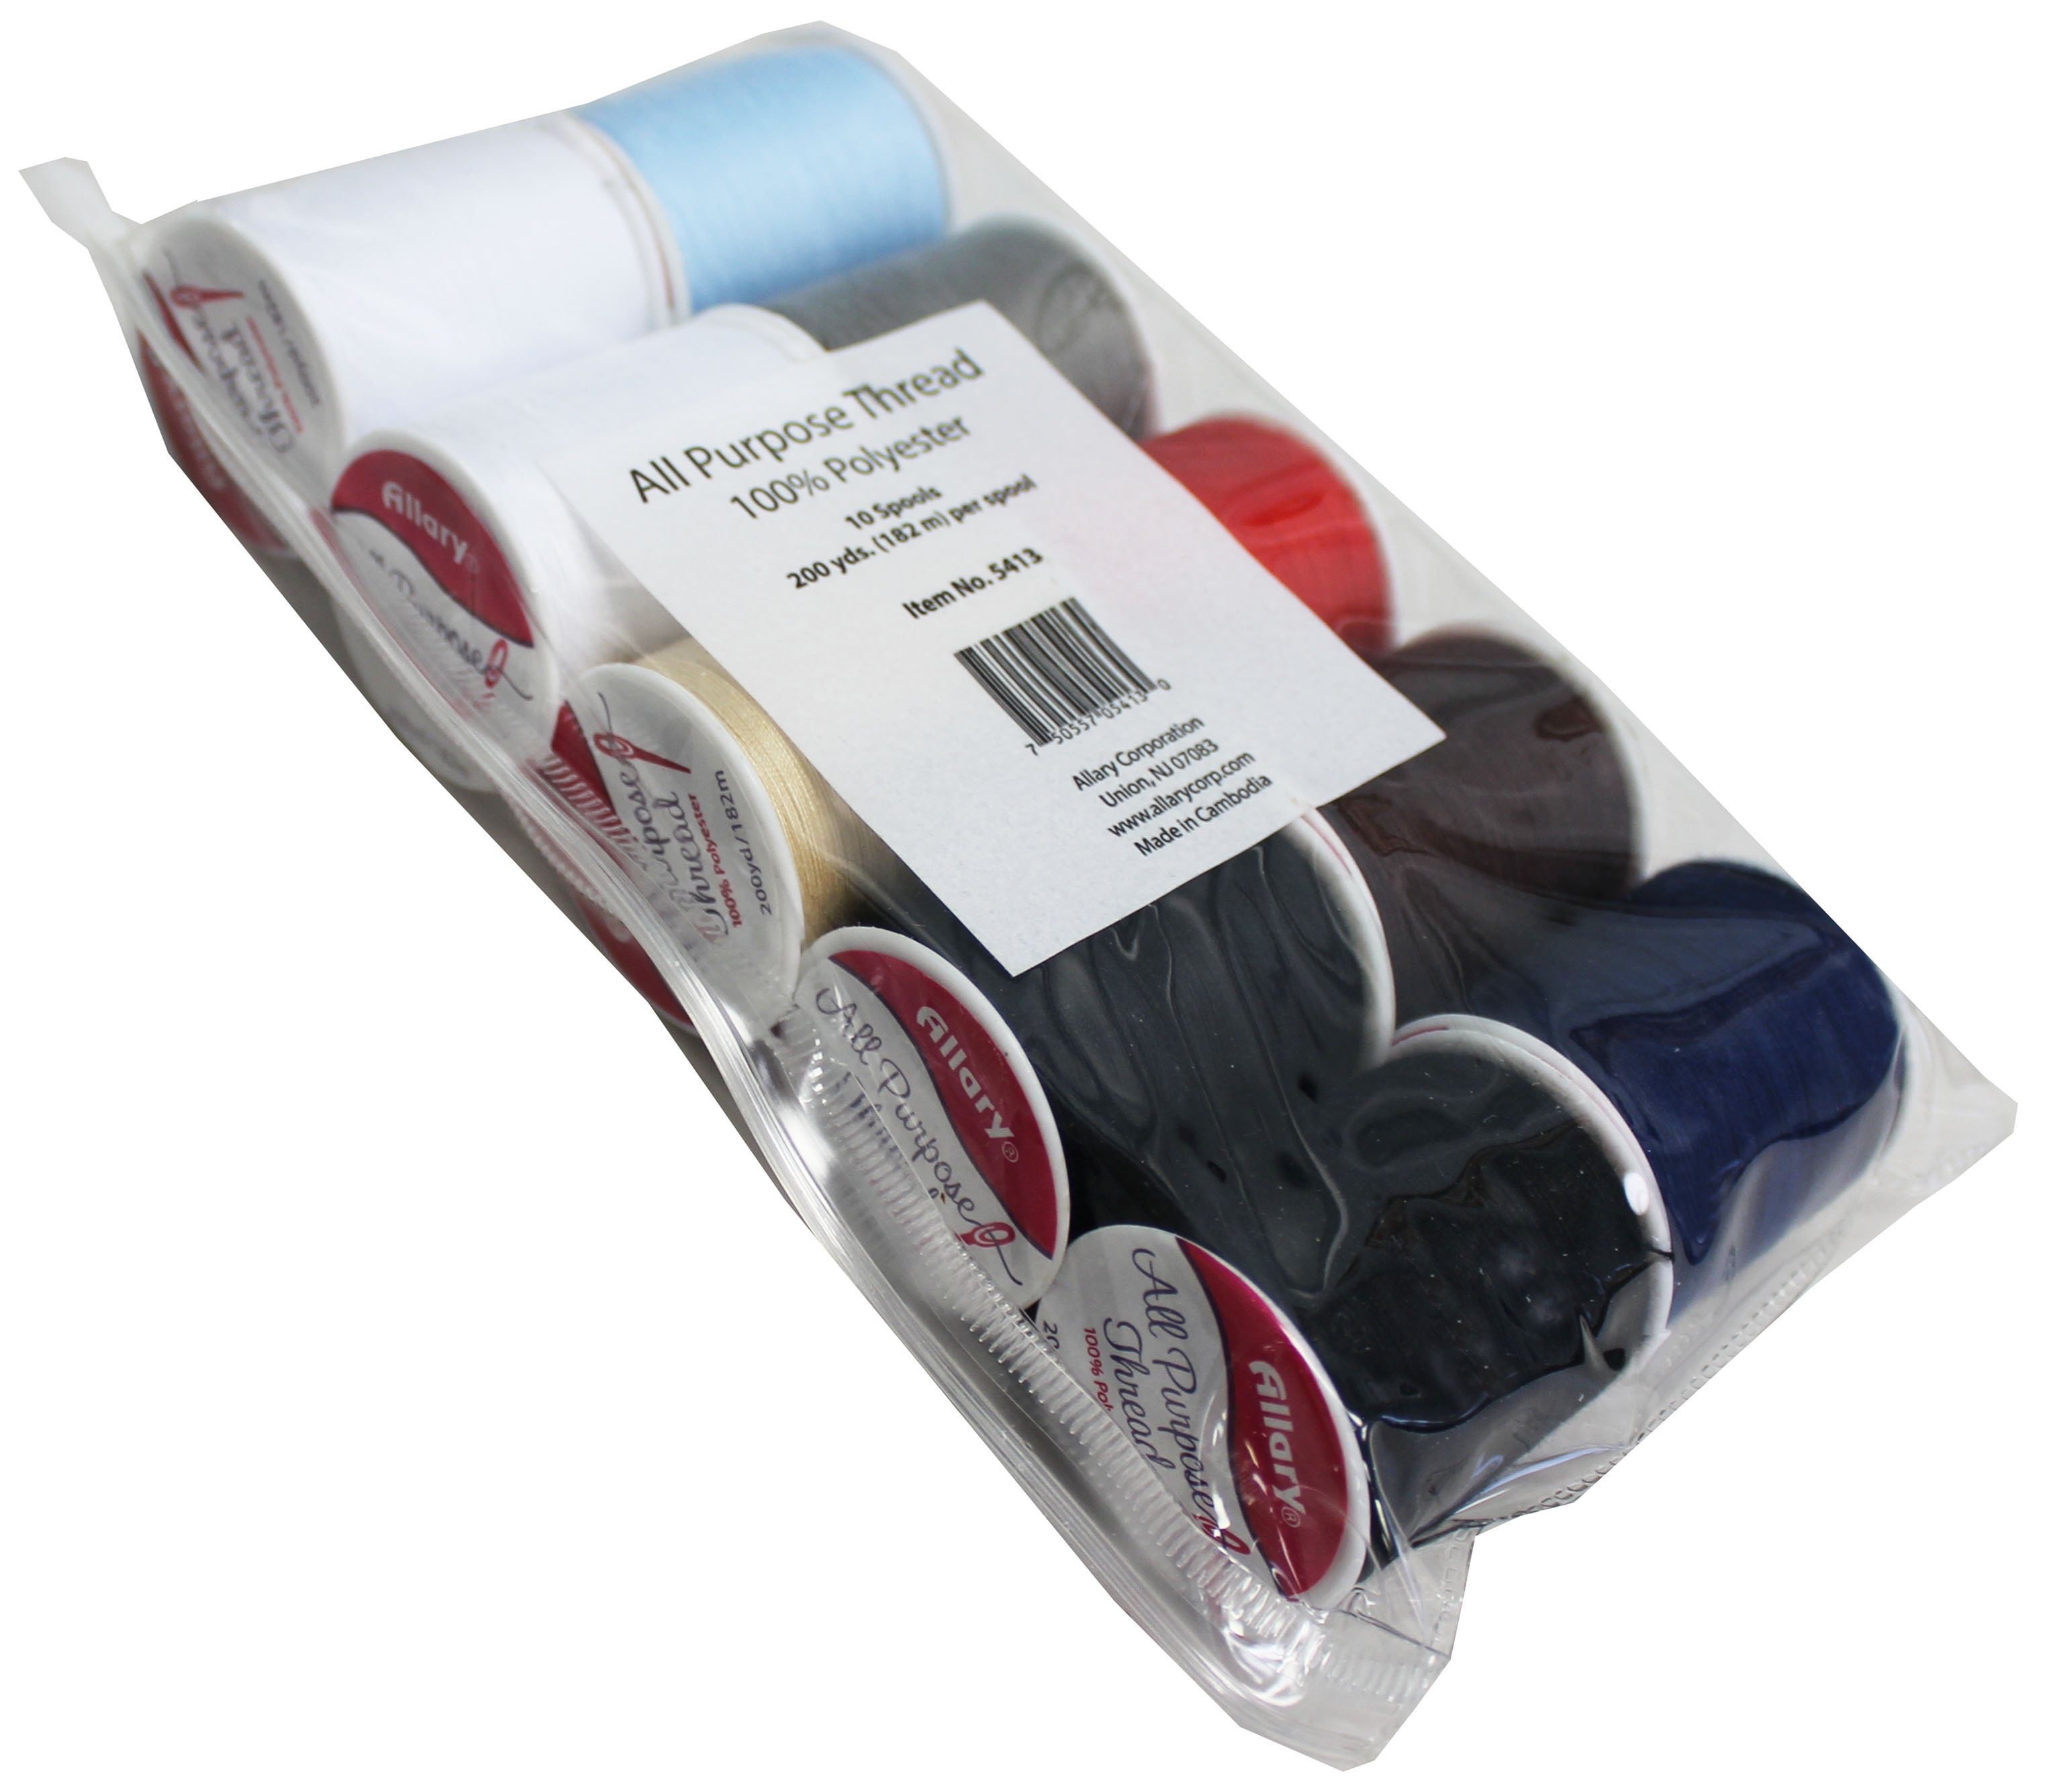  Sewing Thread Kit 100 Color All Purpose Polyester